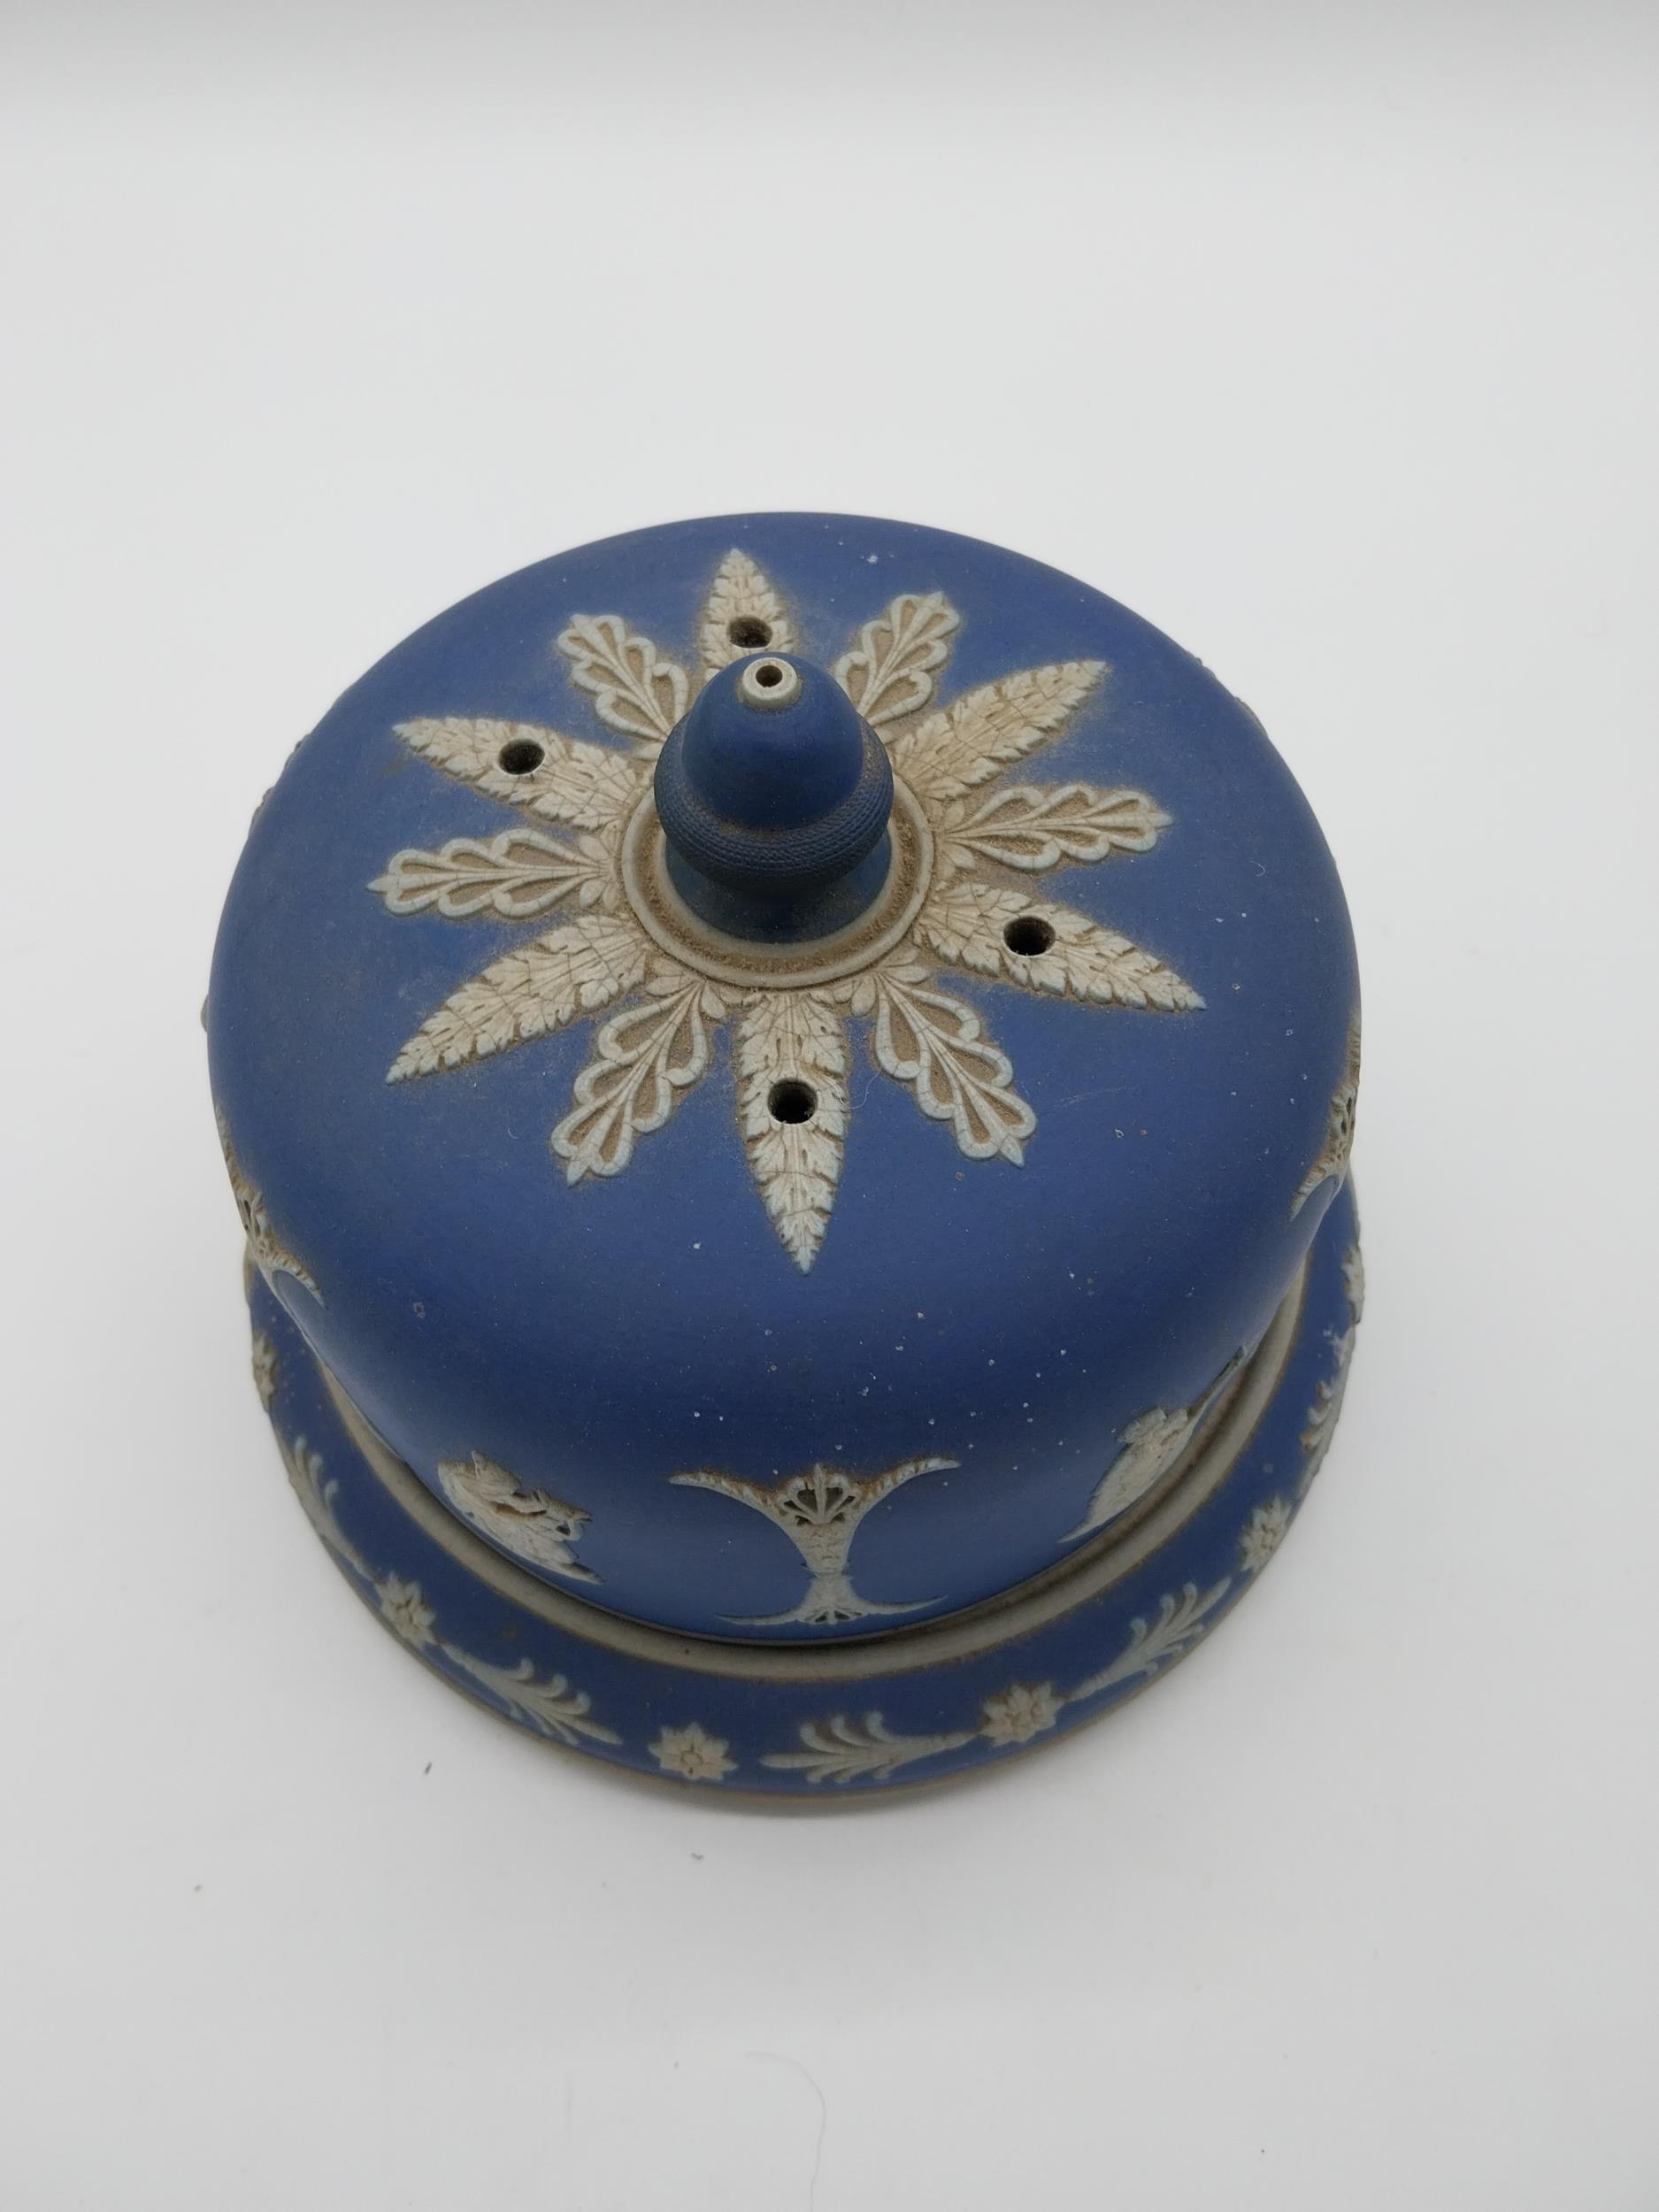 19th C. blue and white stoneware cheese dish {17 cm H x 19 cm Dia.}. - Image 2 of 3